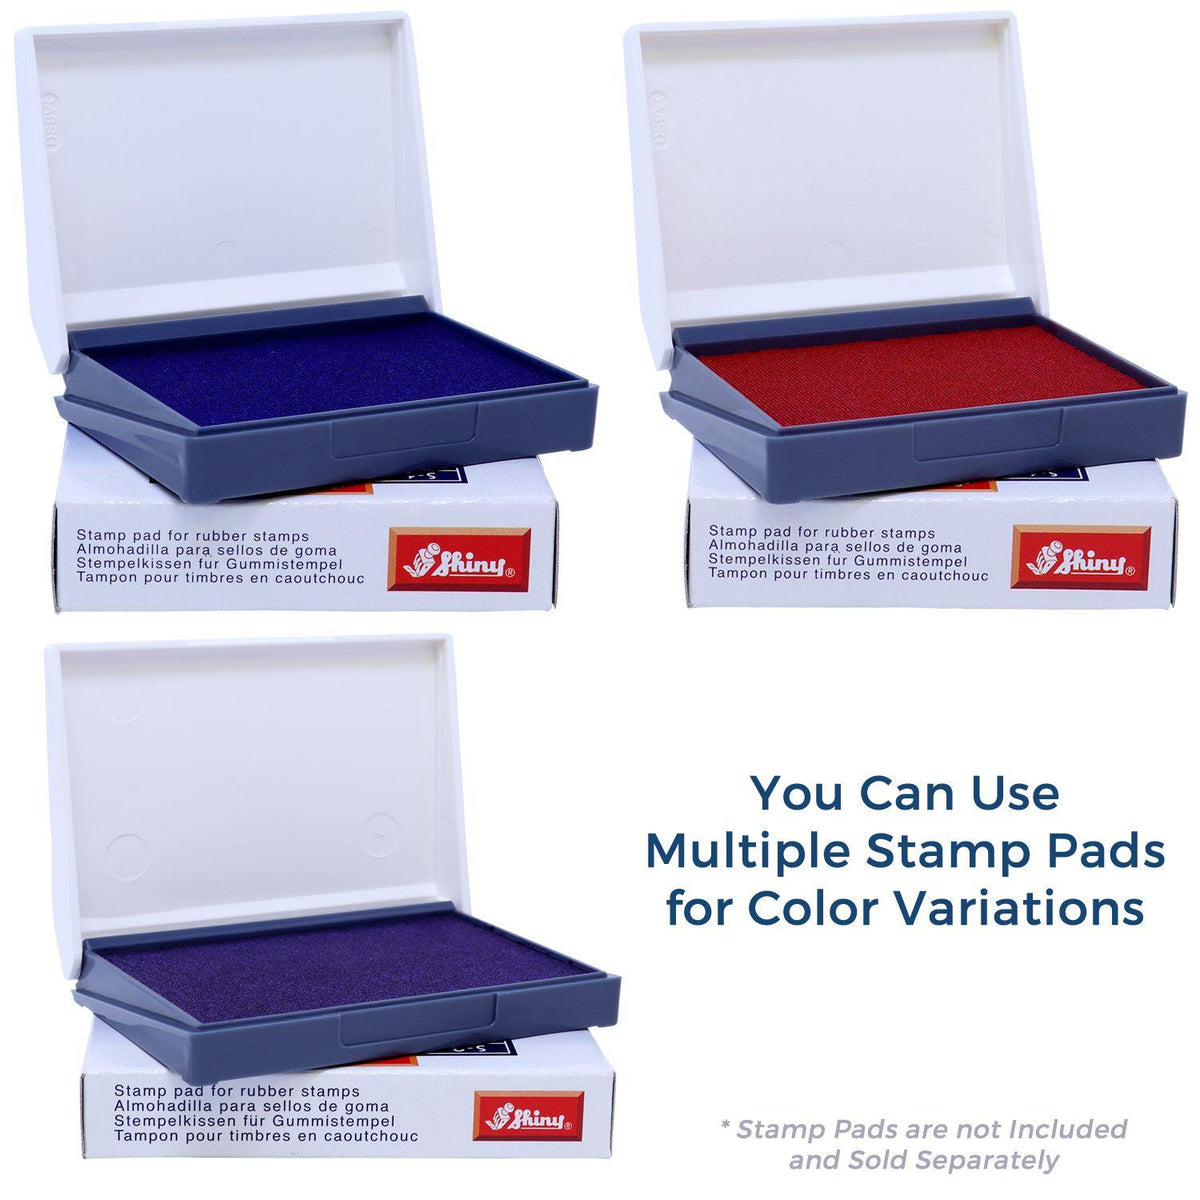 Stamp Pads for Large Media Mail Rubber Stamp Available